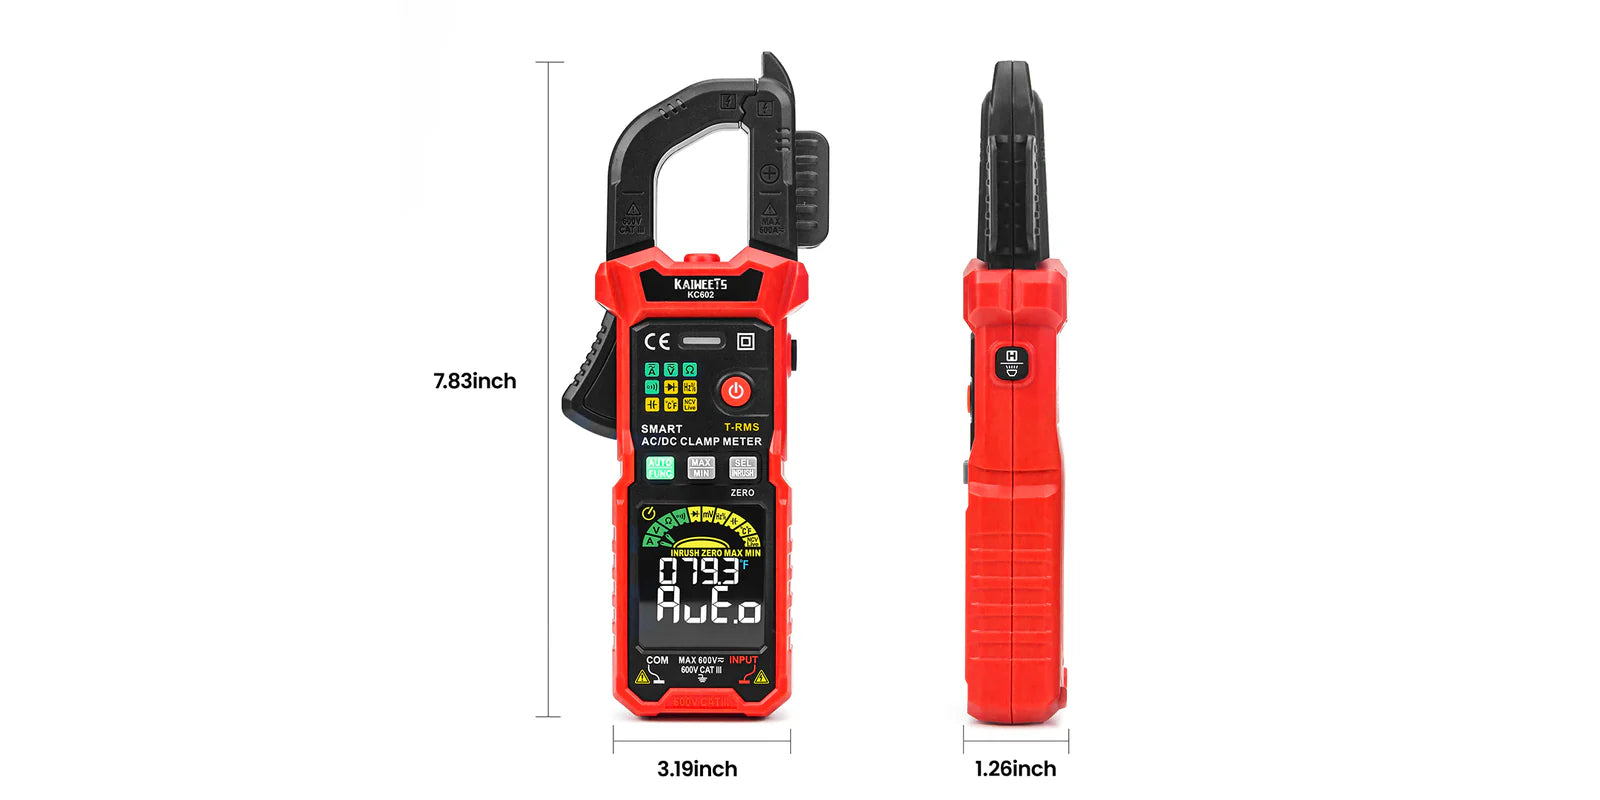 KC602 clamp meter size